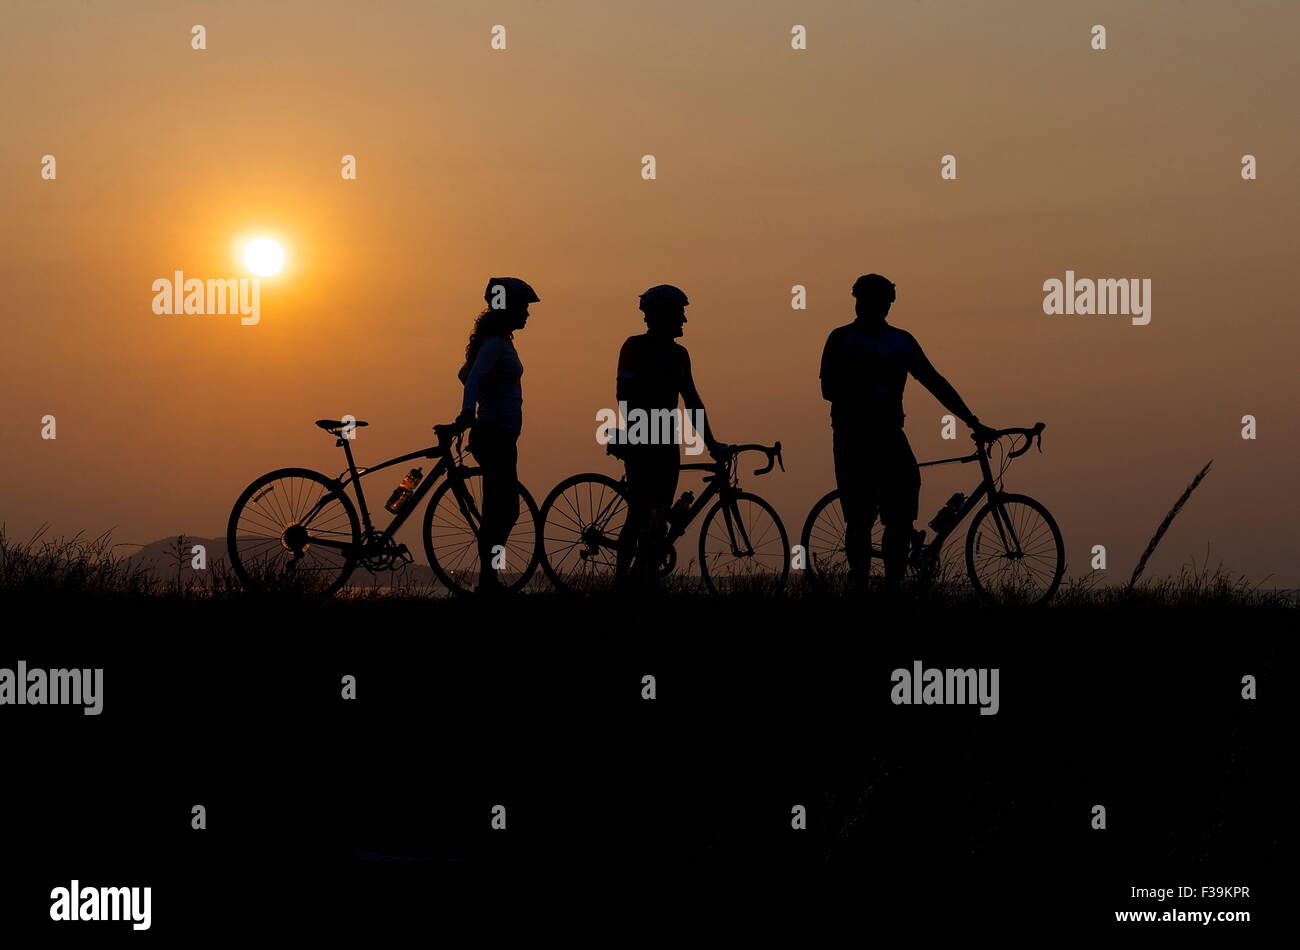 Silhouette of three cyclists at sunset Stock Photo